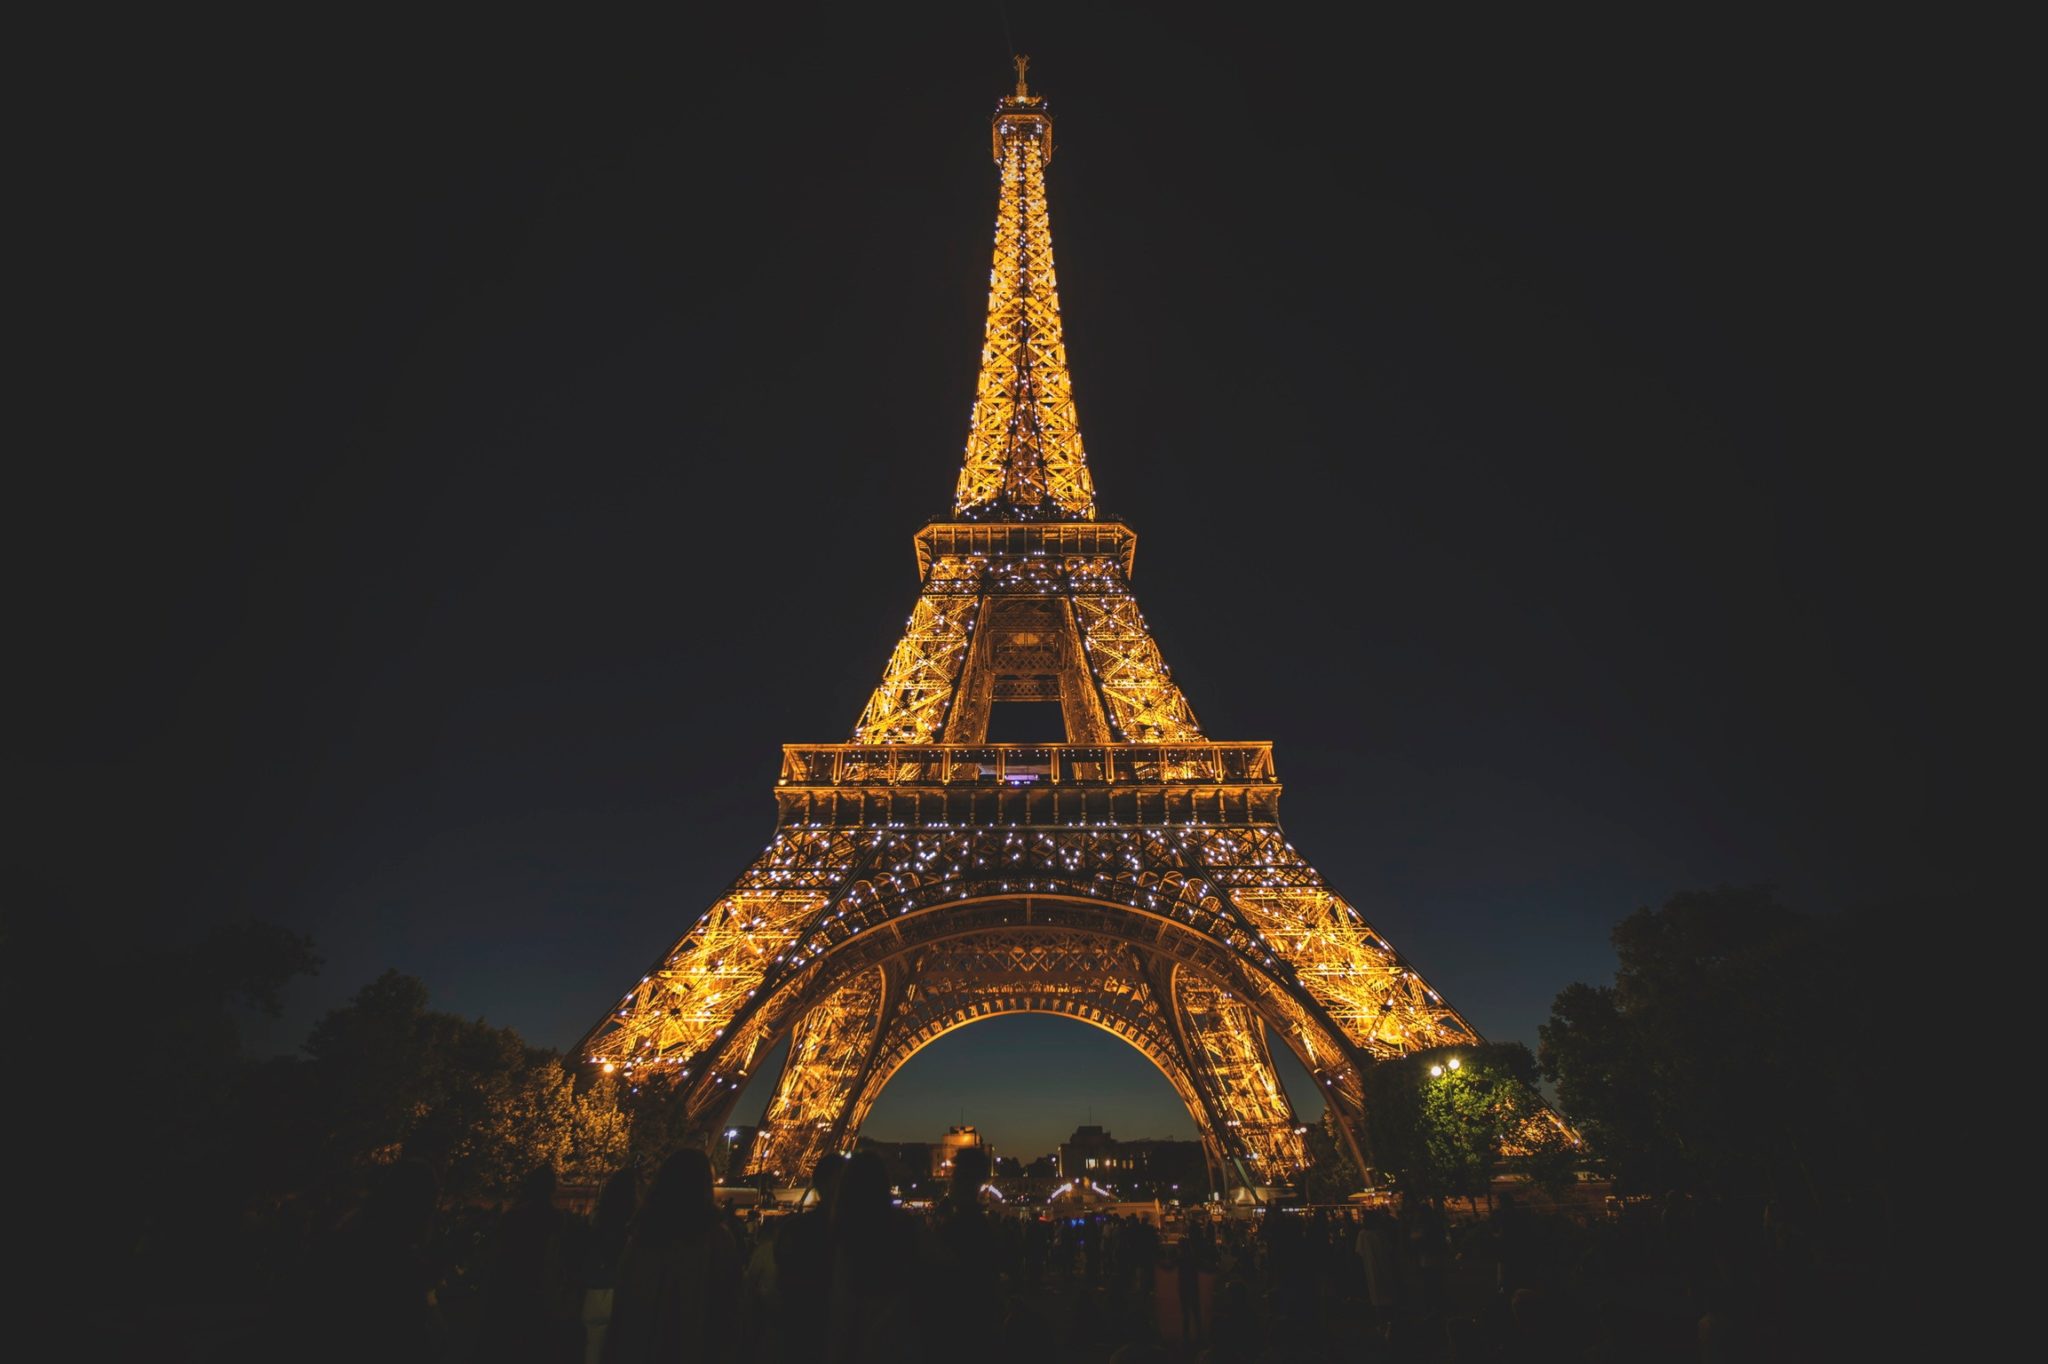 Eiffel Tower at night photographed by Stephen Leonardi | The Pink Bride® www.thepinkbride.com